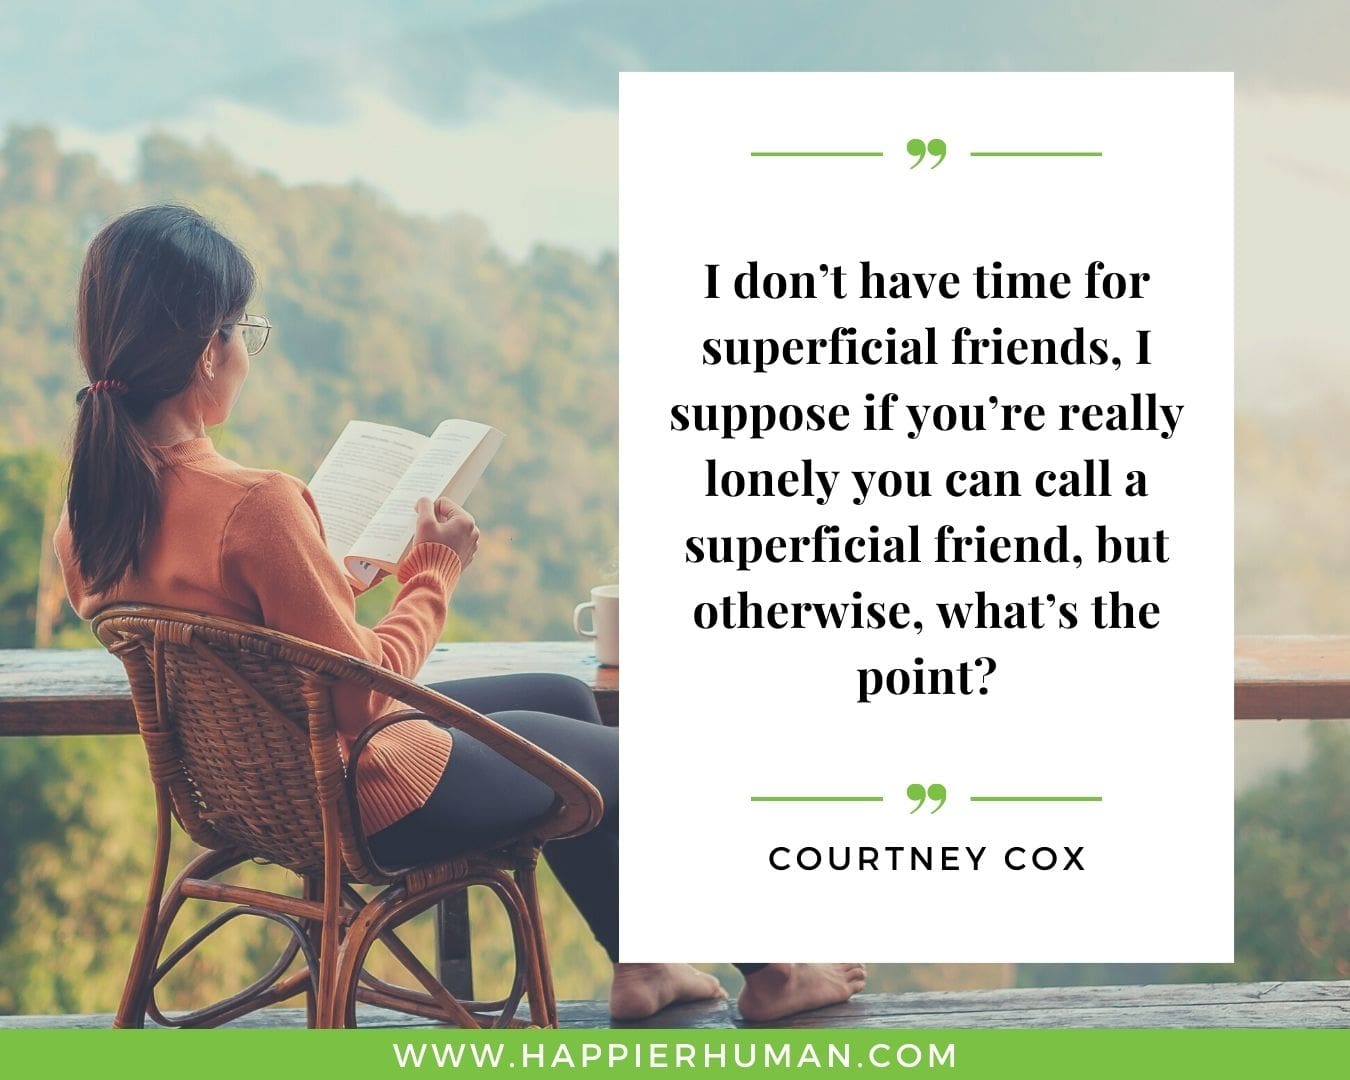 Introvert Quotes - “I don’t have time for superficial friends, I suppose if you’re really lonely you can call a superficial friend, but otherwise, what’s the point?” – Courtney Cox